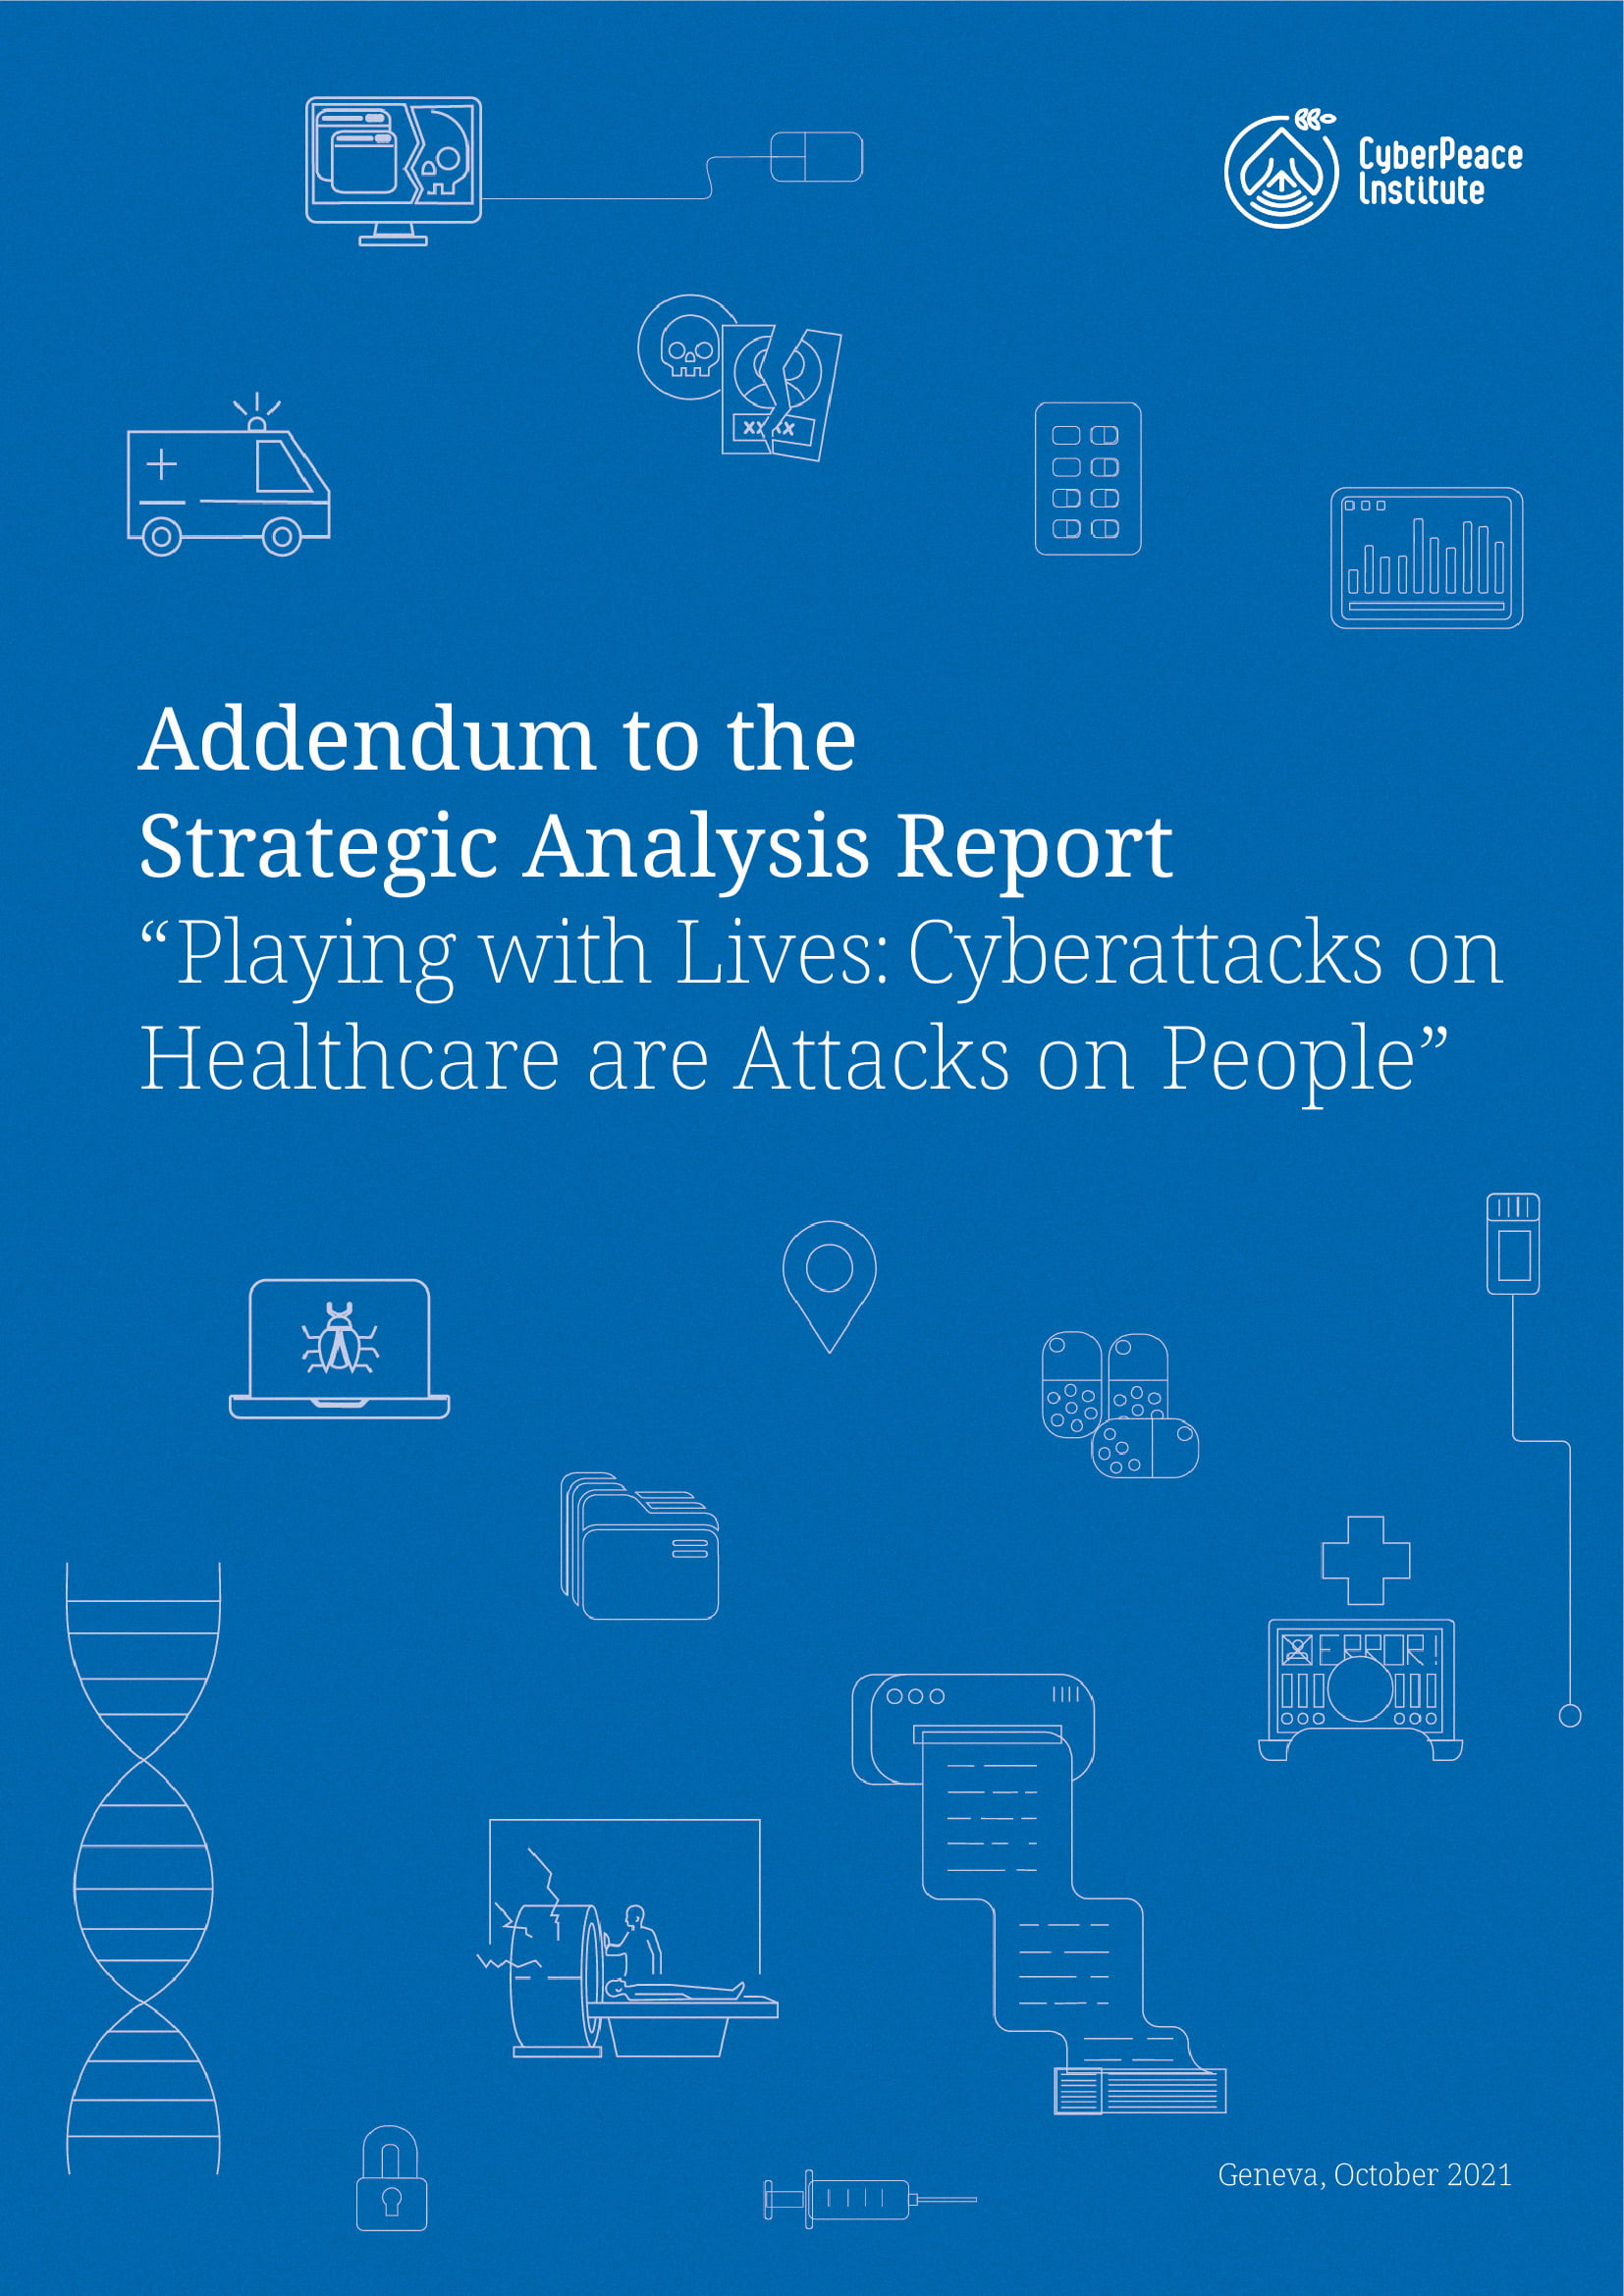 Addendum to the Strategic Analysis Report “Playing with Lives: Cyberattacks on Healthcare are Attacks on People”